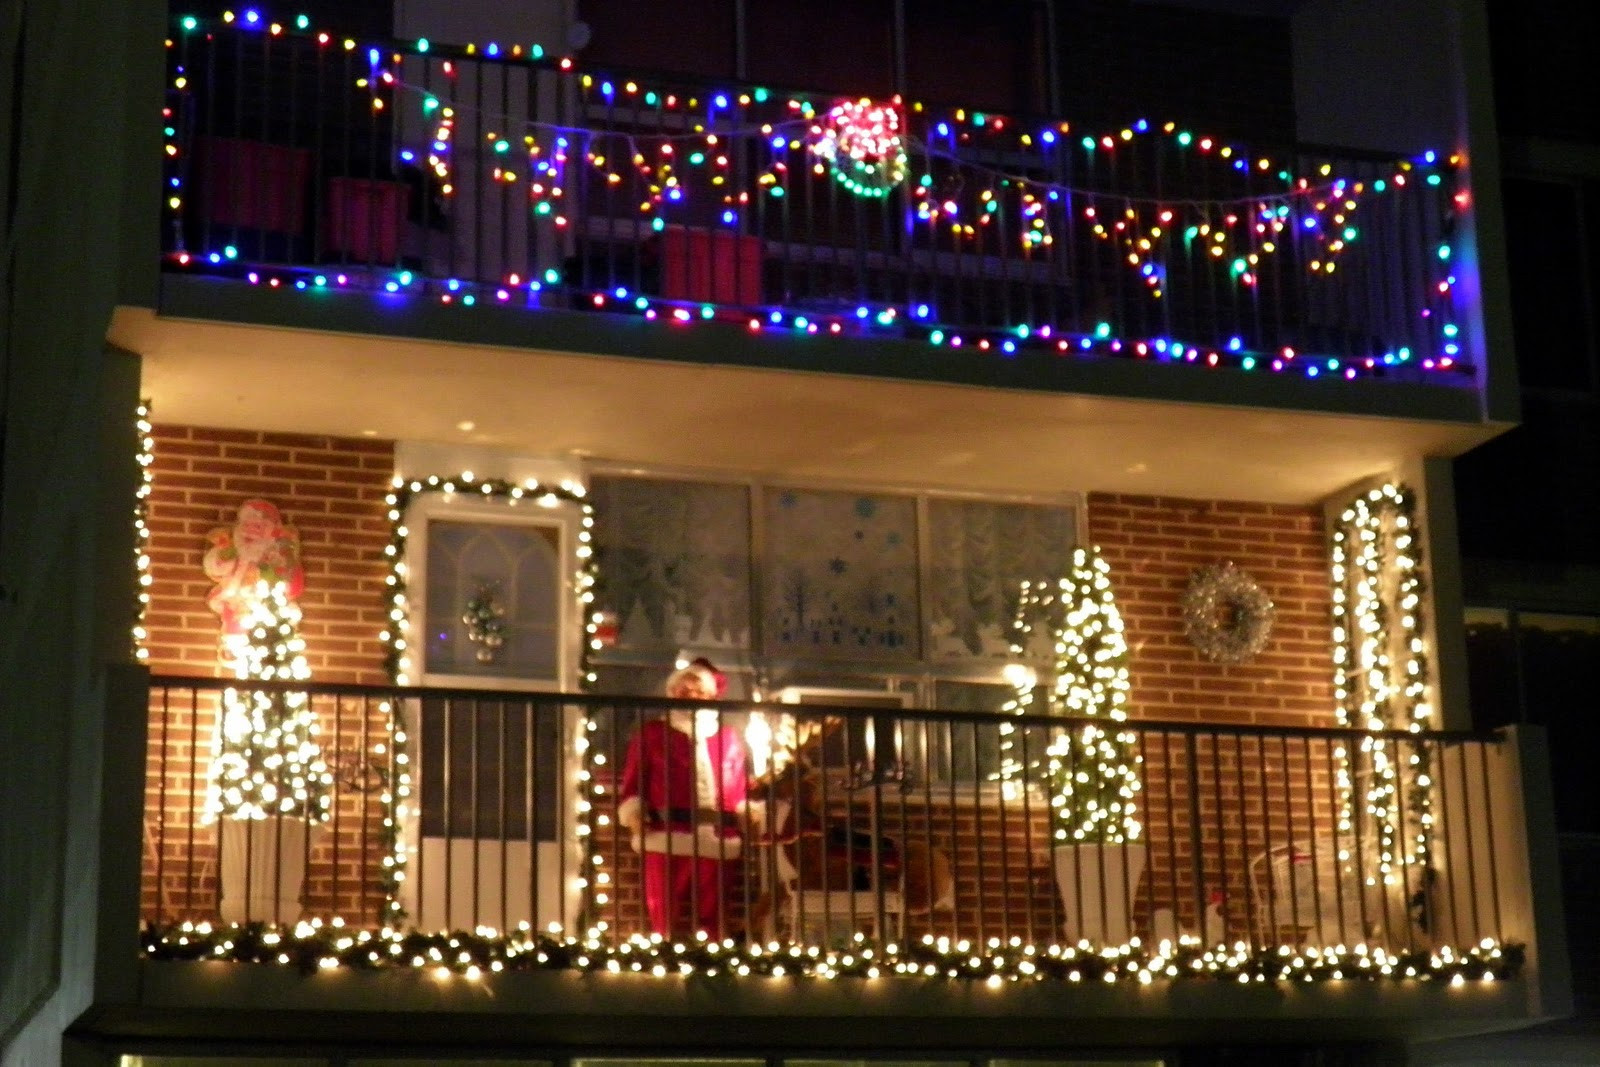 Apartment Balcony Christmas Decorating Ideas
 White Oaks munity It s beginning to look a lot like